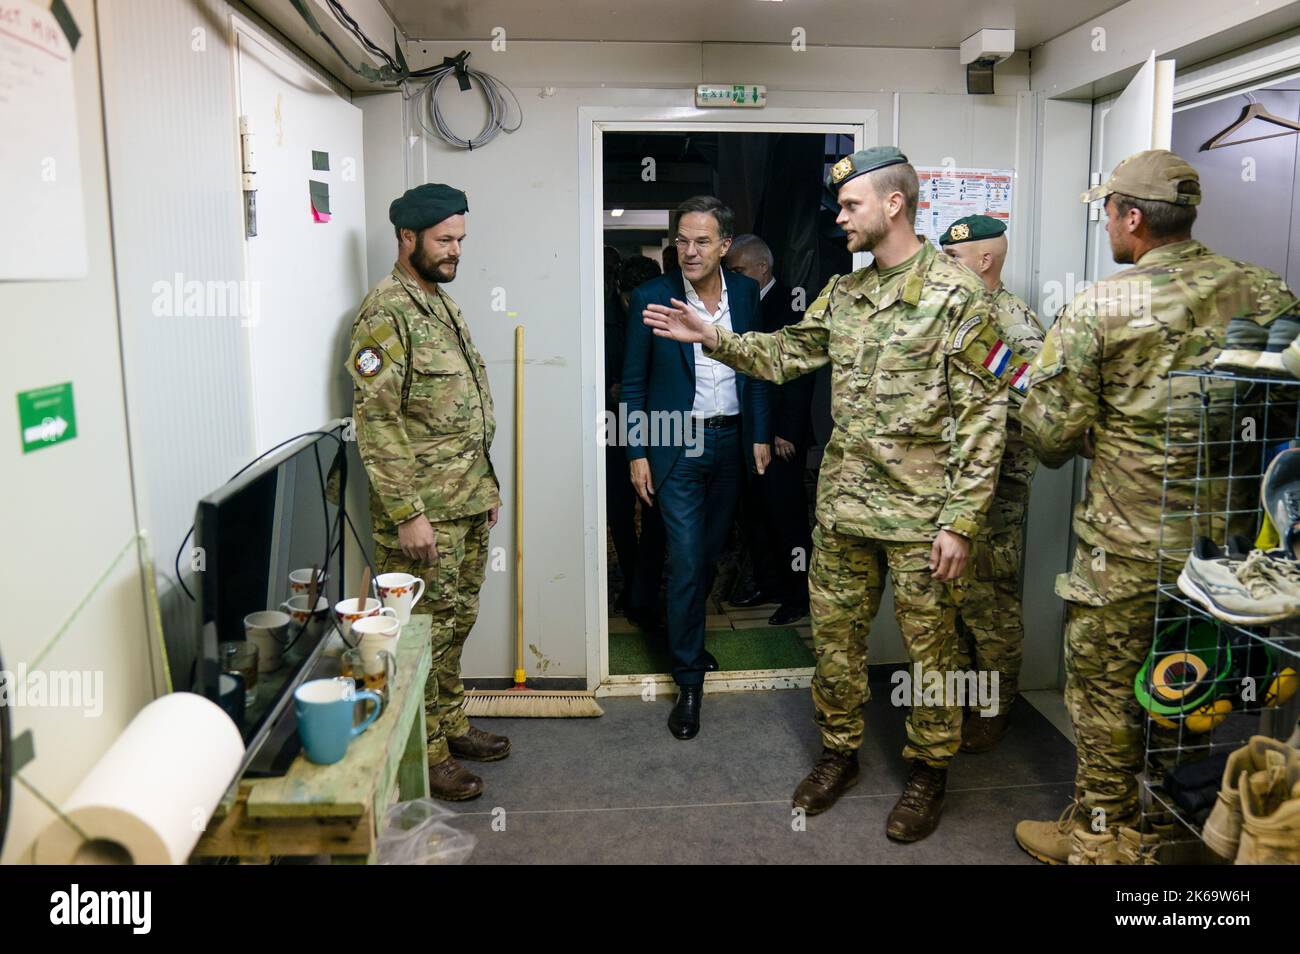 2022-10-12 17:51:54 CINCU - Prime Minister Mark Rutte is given a tour of a  military base where Dutch troops are stationed, during a visit to Romania.  The prime minister discusses, among other